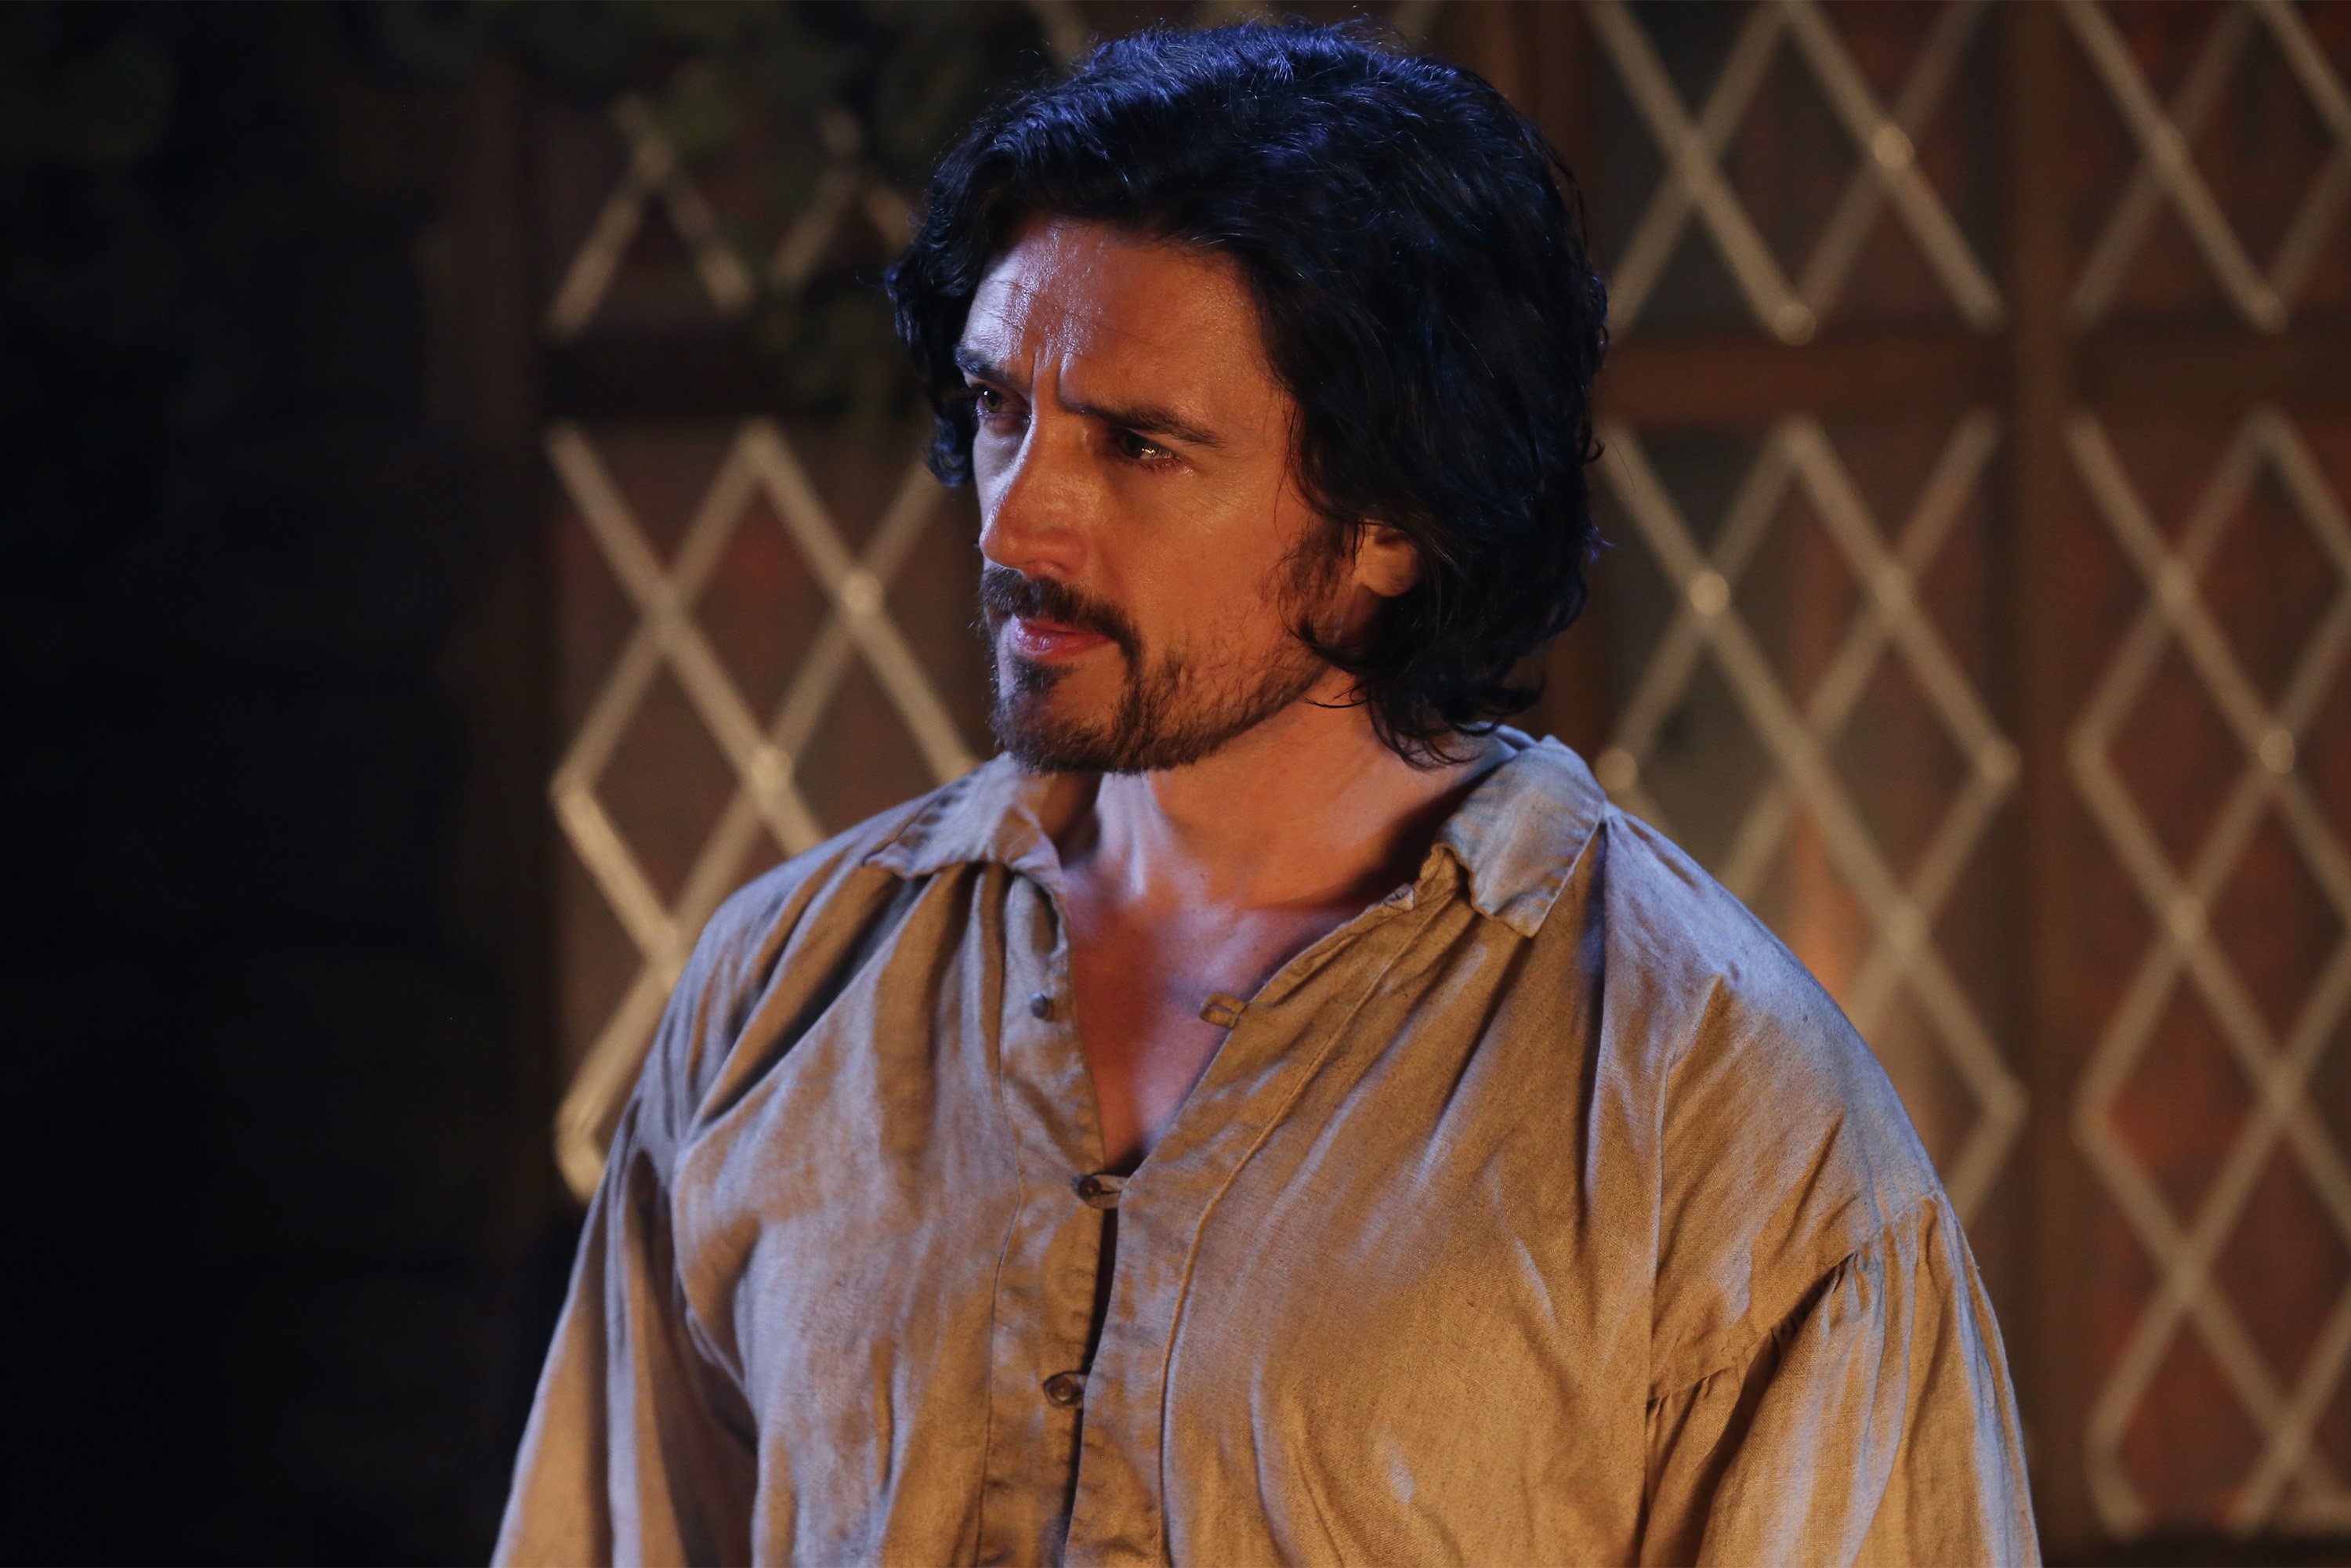 Adam Croasdell as Brennan Jones - Hook's Father - in Once Upon A Time.